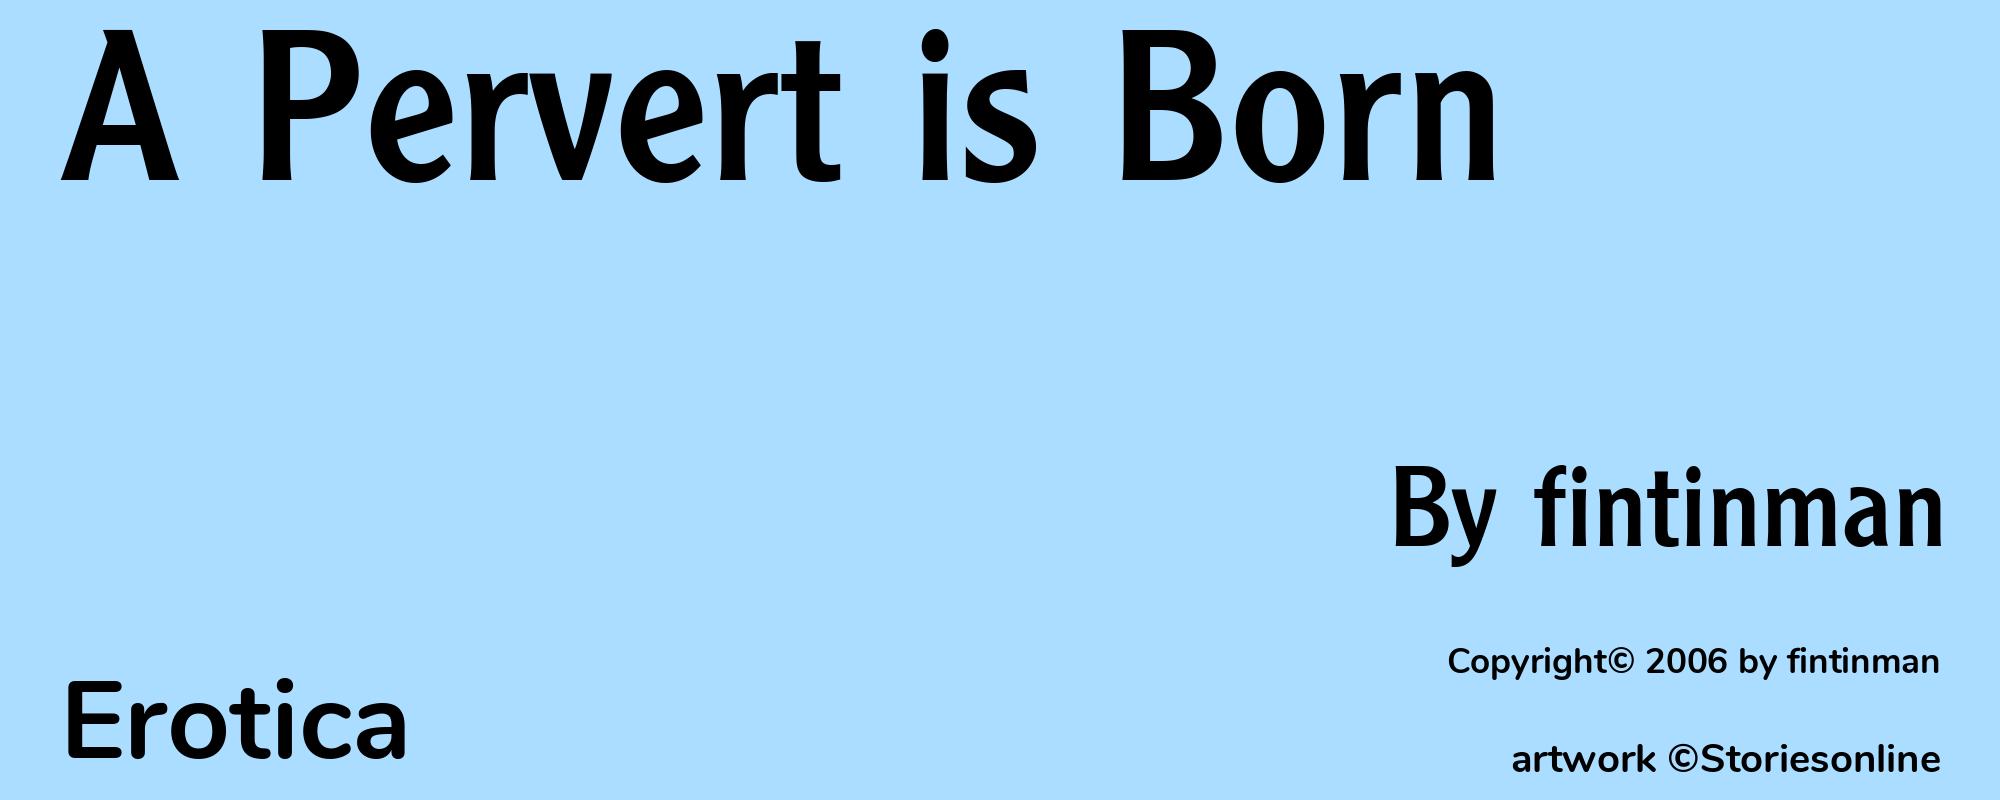 A Pervert is Born - Cover